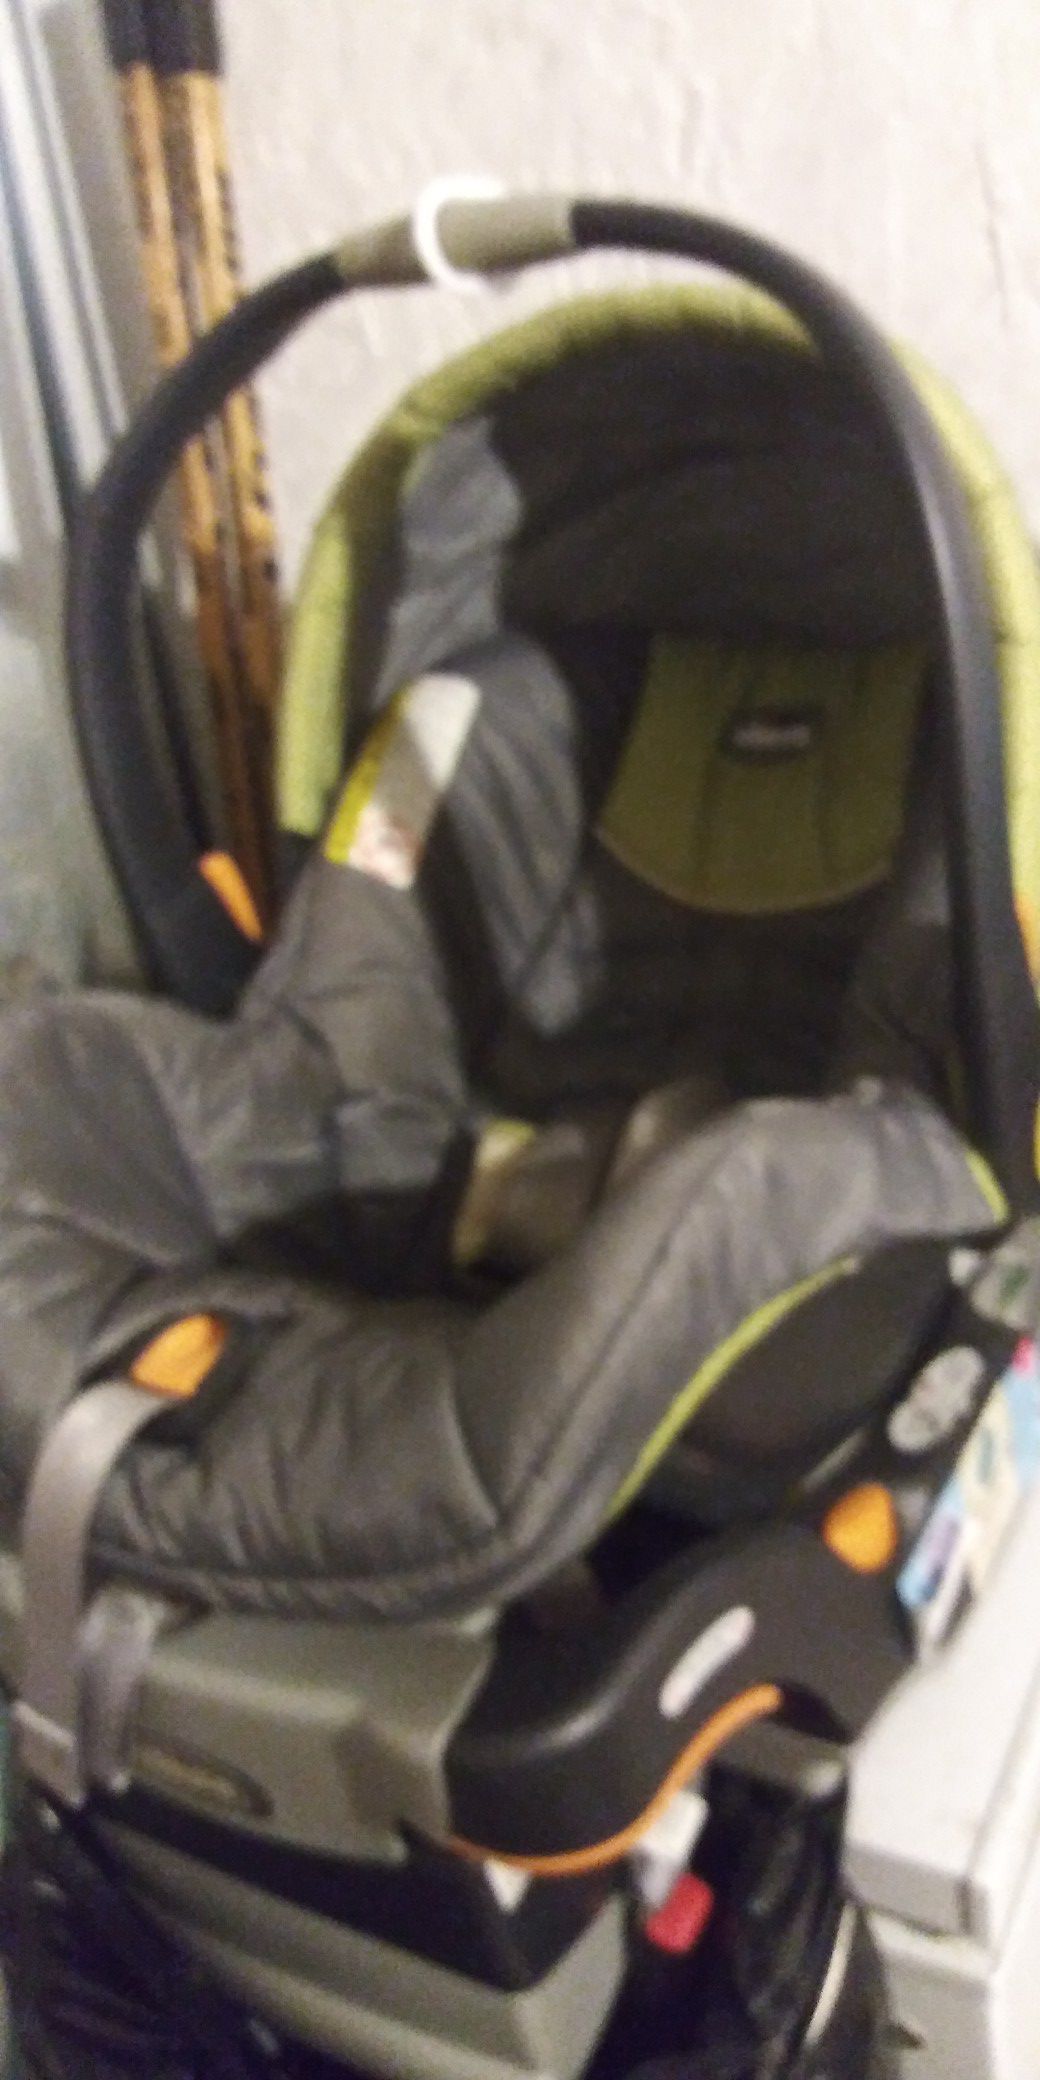 Chicco new baby car seat 15dol Firm lots 4sale my post go look got match stroller also